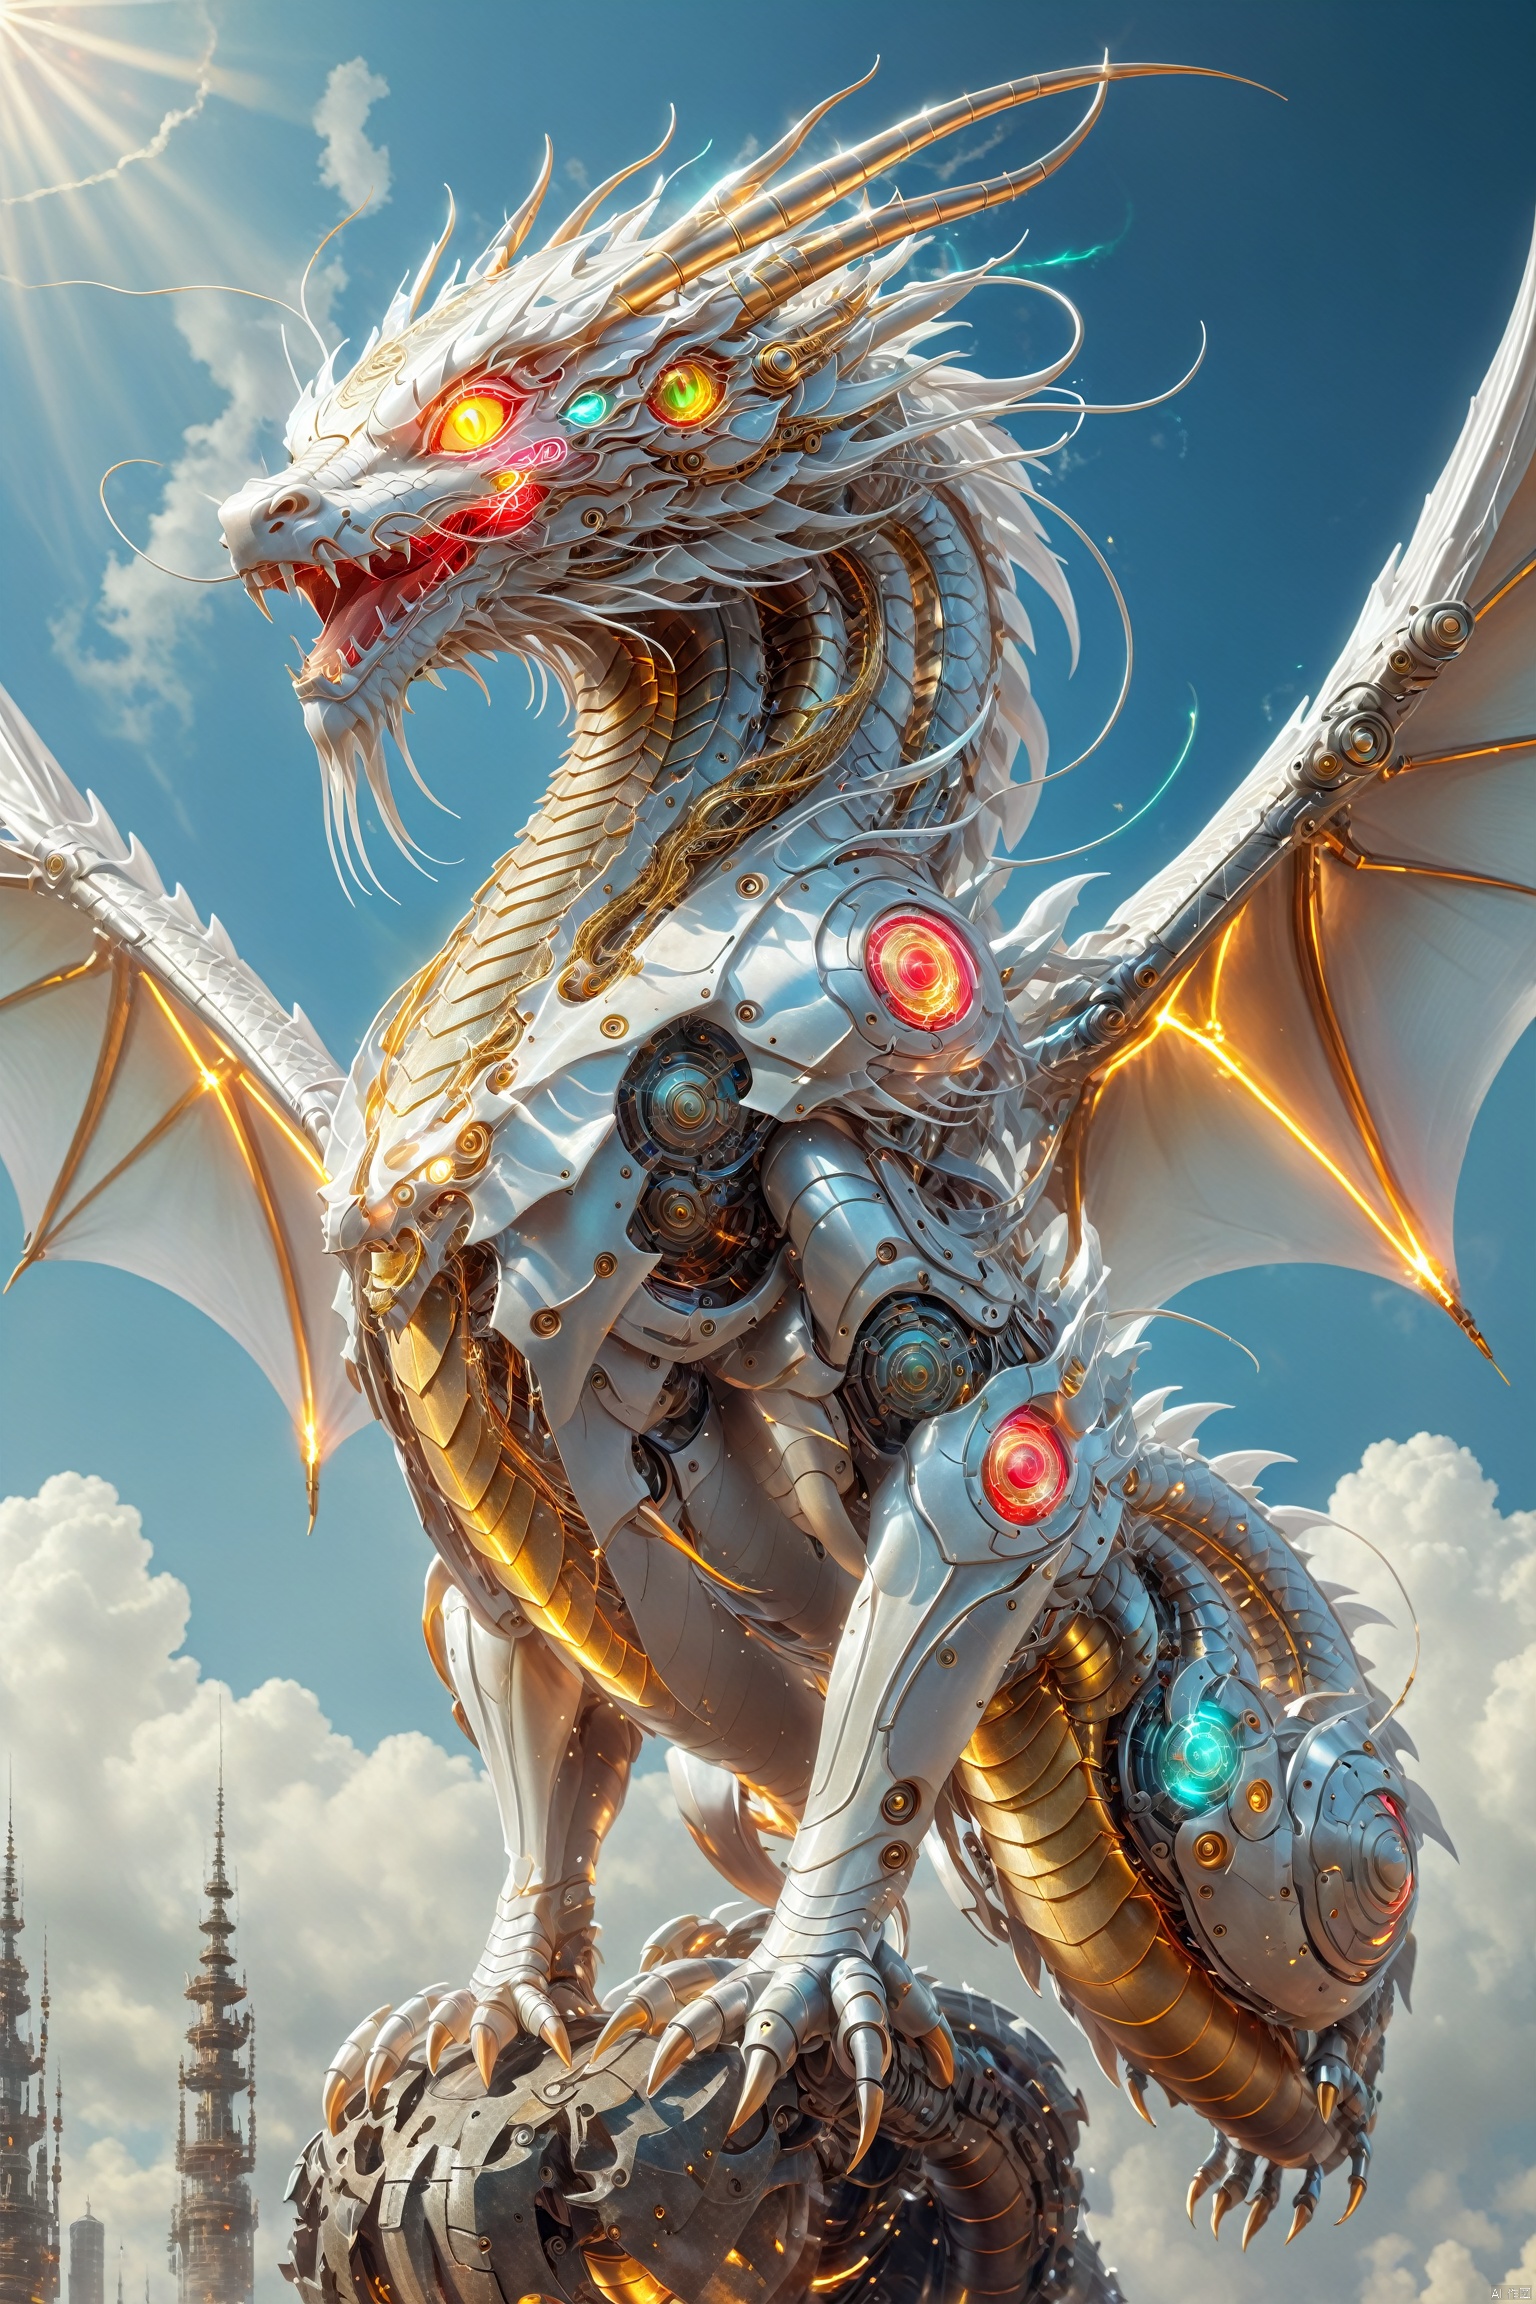  A huge cyberpunk style dragon is flying in the sky, its body made of metal and machinery, shining with golden light. Its wings spread out, as if flying in the clouds. The dragon's eyes emit a laser, giving people a mysterious and powerful feeling. High definition, clear and realistic painting art